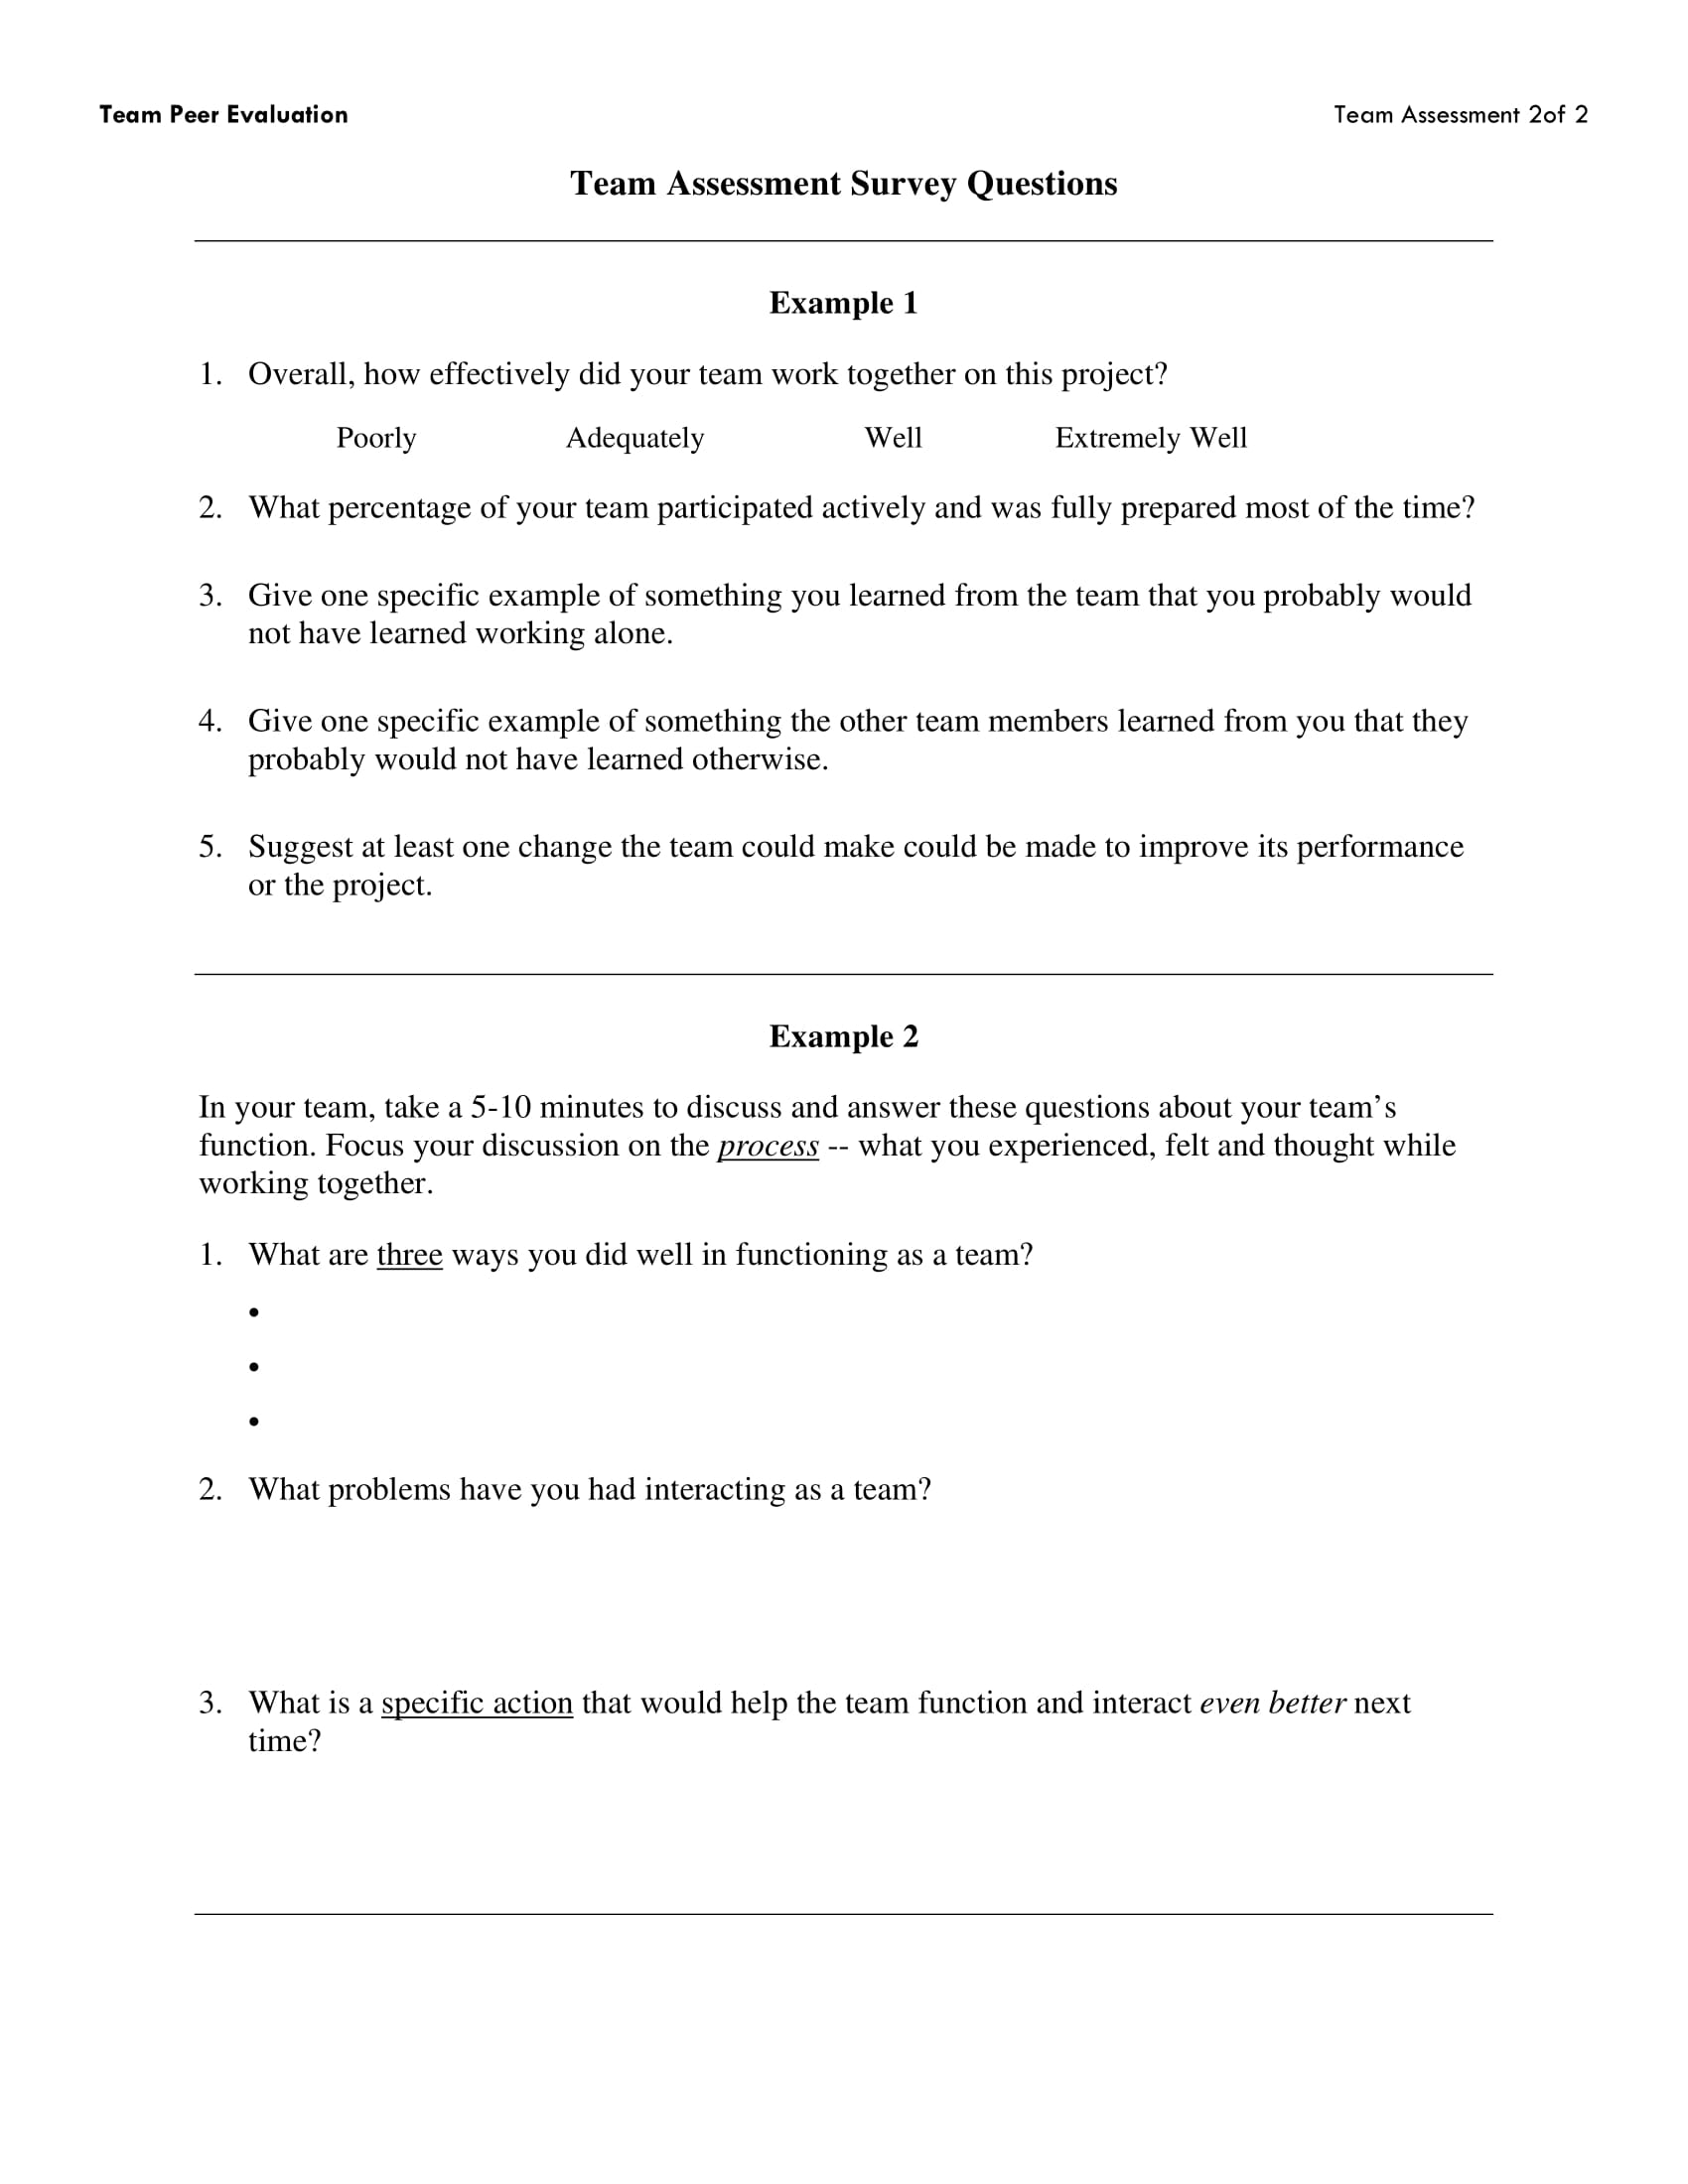 Team Assessment Survey Questions Example